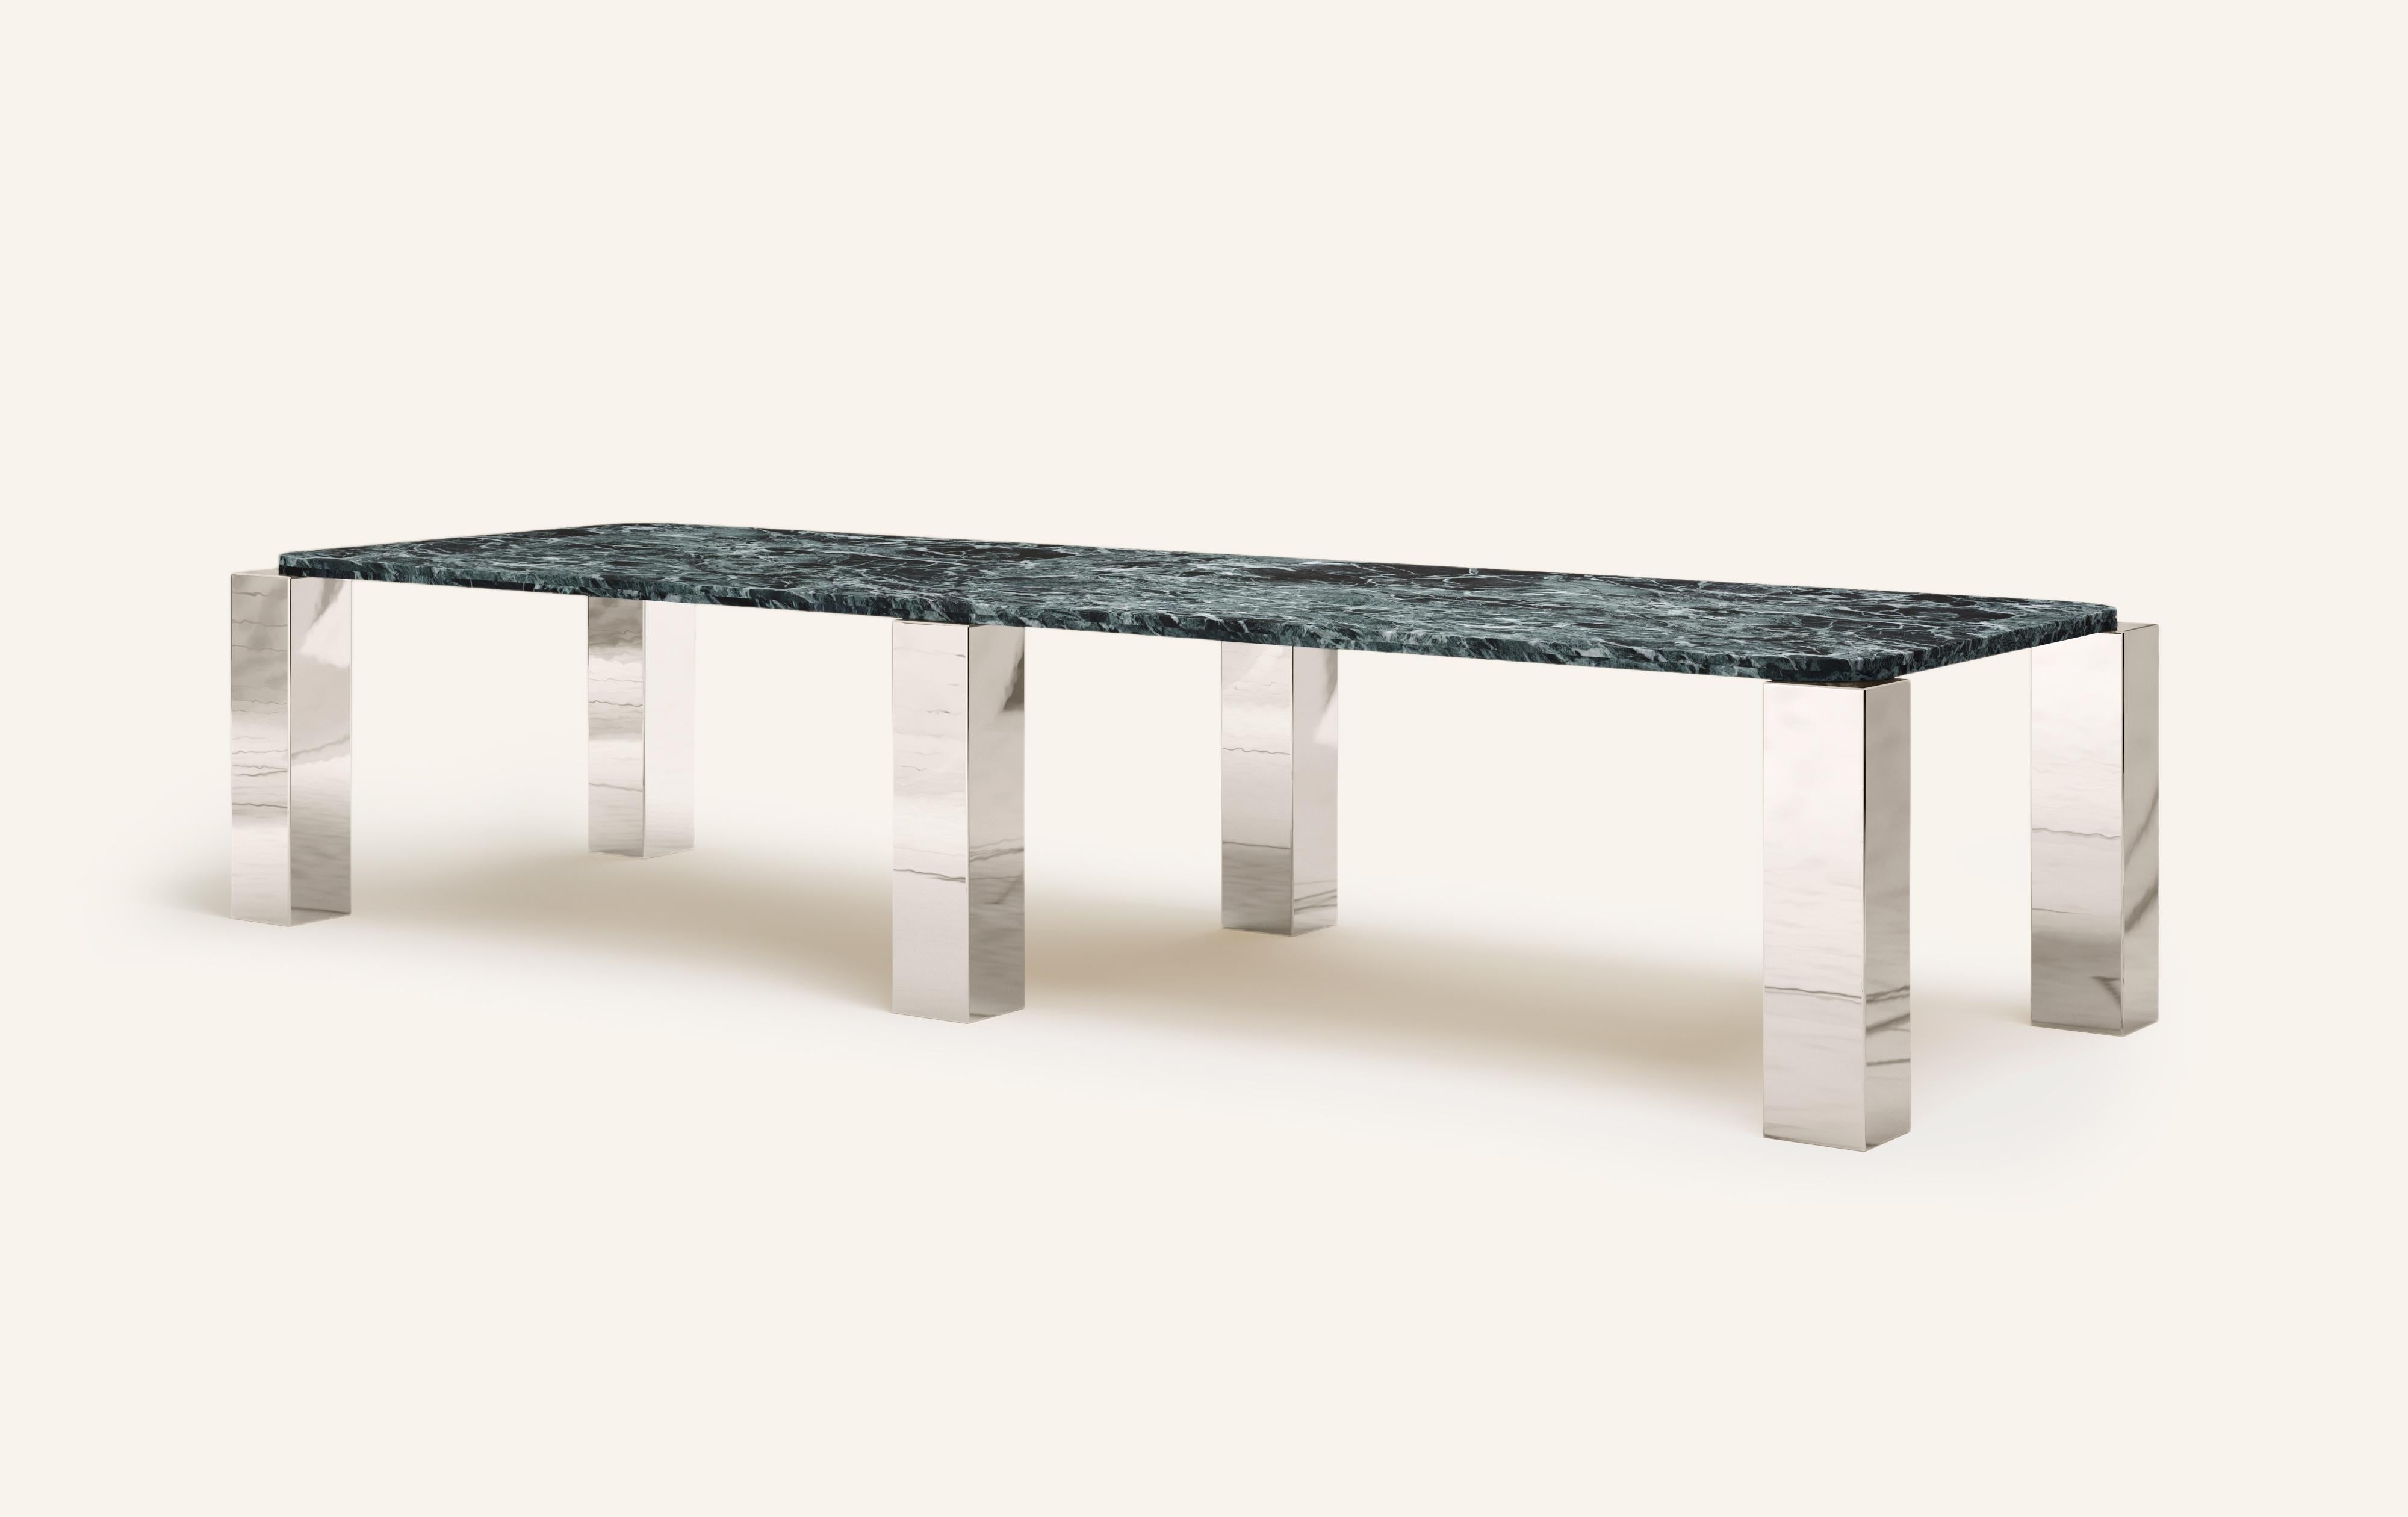 Organic Modern FORM(LA) Cubo Rectangle Dining Table 146”L x 50”W x 30”H Verde Marble & Chrome For Sale